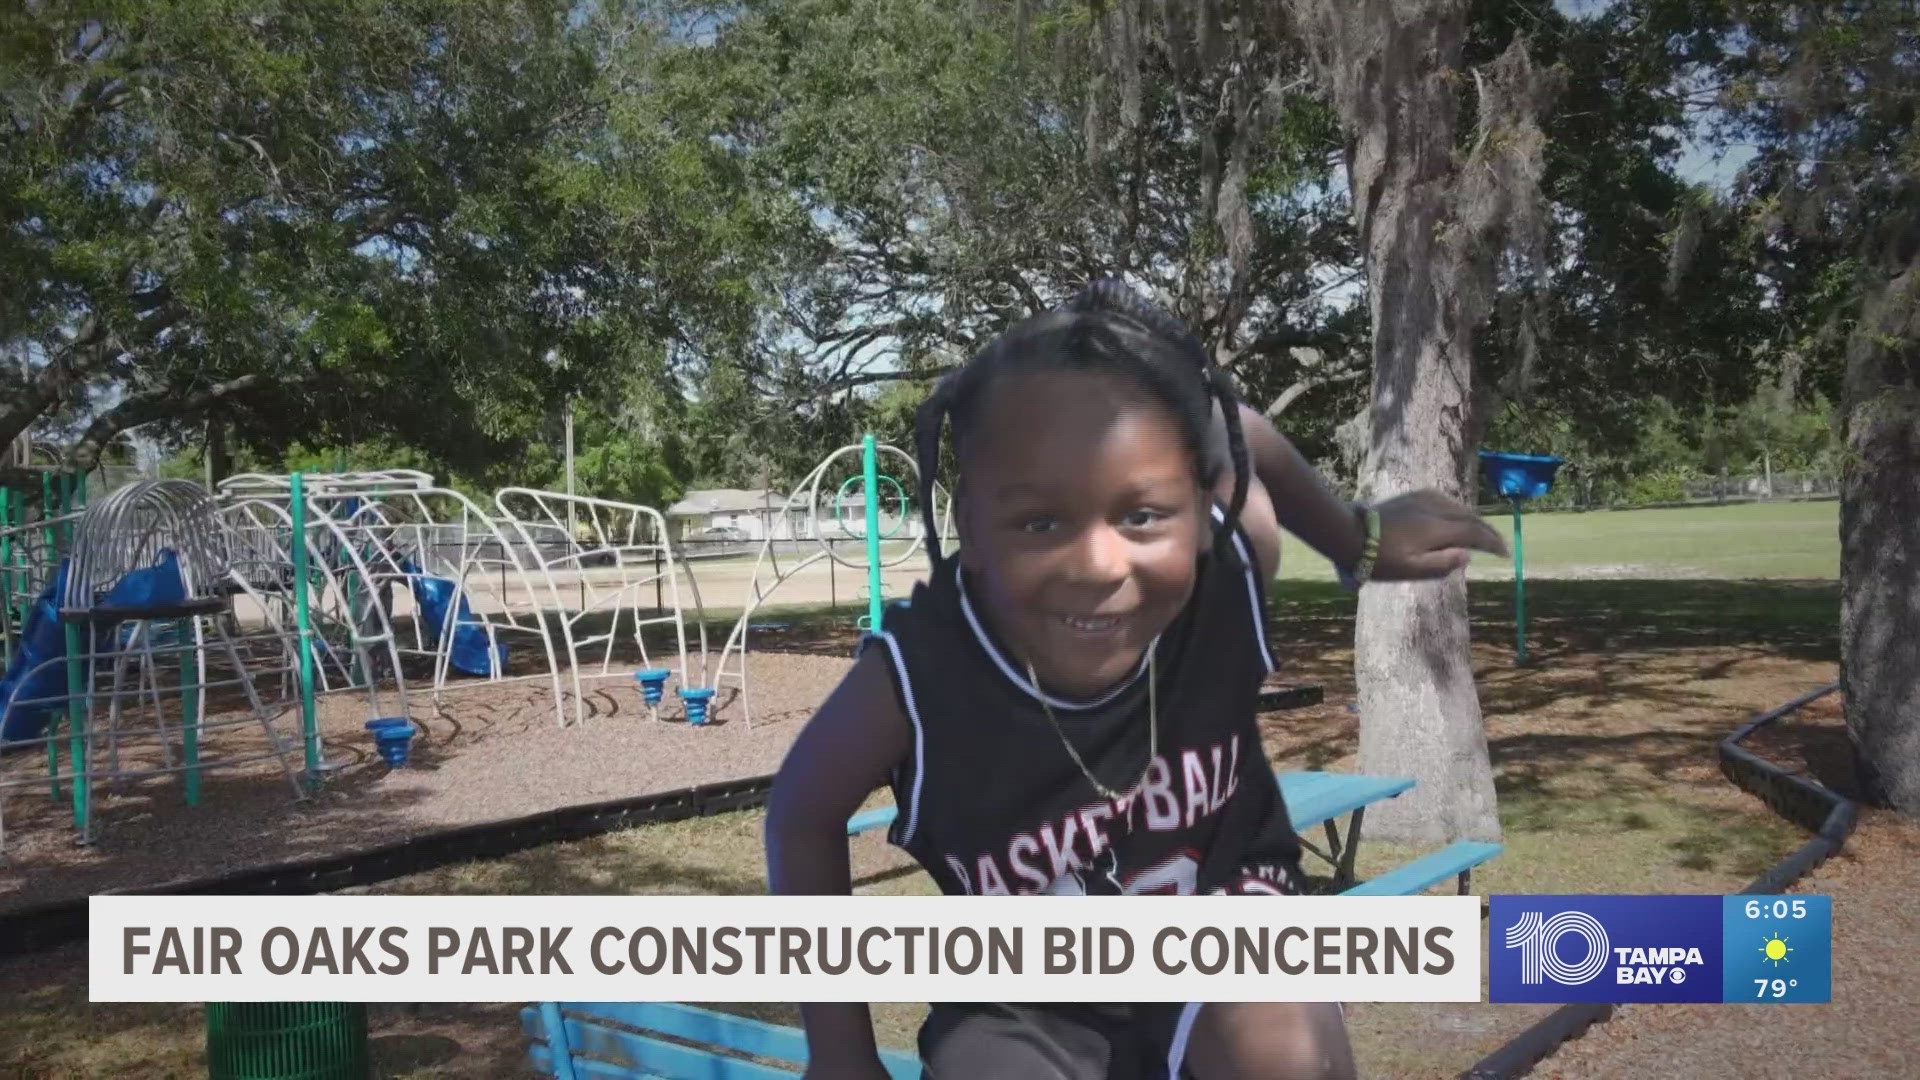 Nearly a quarter of the community surrounding Fair Oaks Park lives below the poverty line.